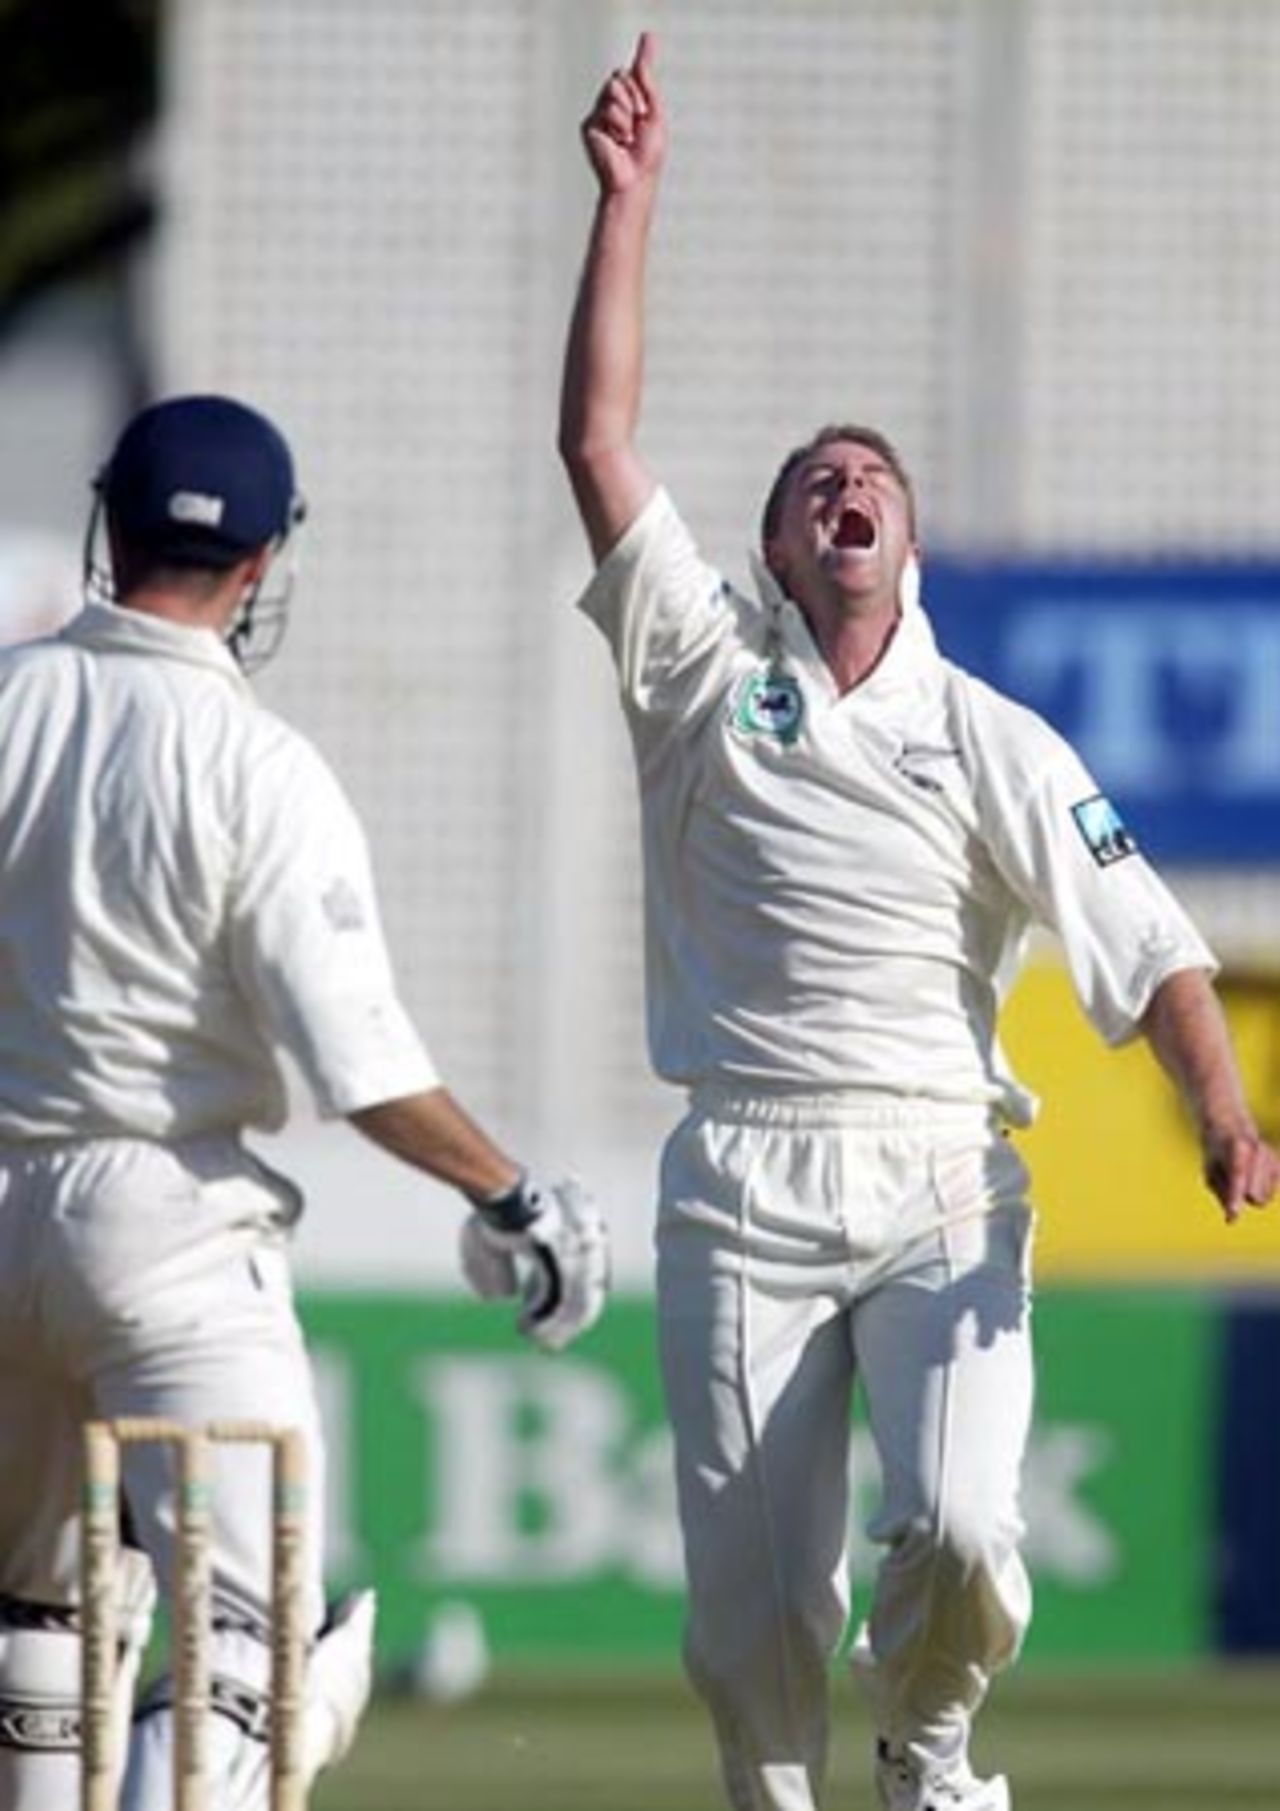 New Zealand bowler Chris Drum celebrates the dismissal of England batsman Michael Vaughan, caught by Stephen Fleming for seven. 2nd Test: New Zealand v England at Basin Reserve, Wellington, 21-25 March 2002 (22 March 2002).